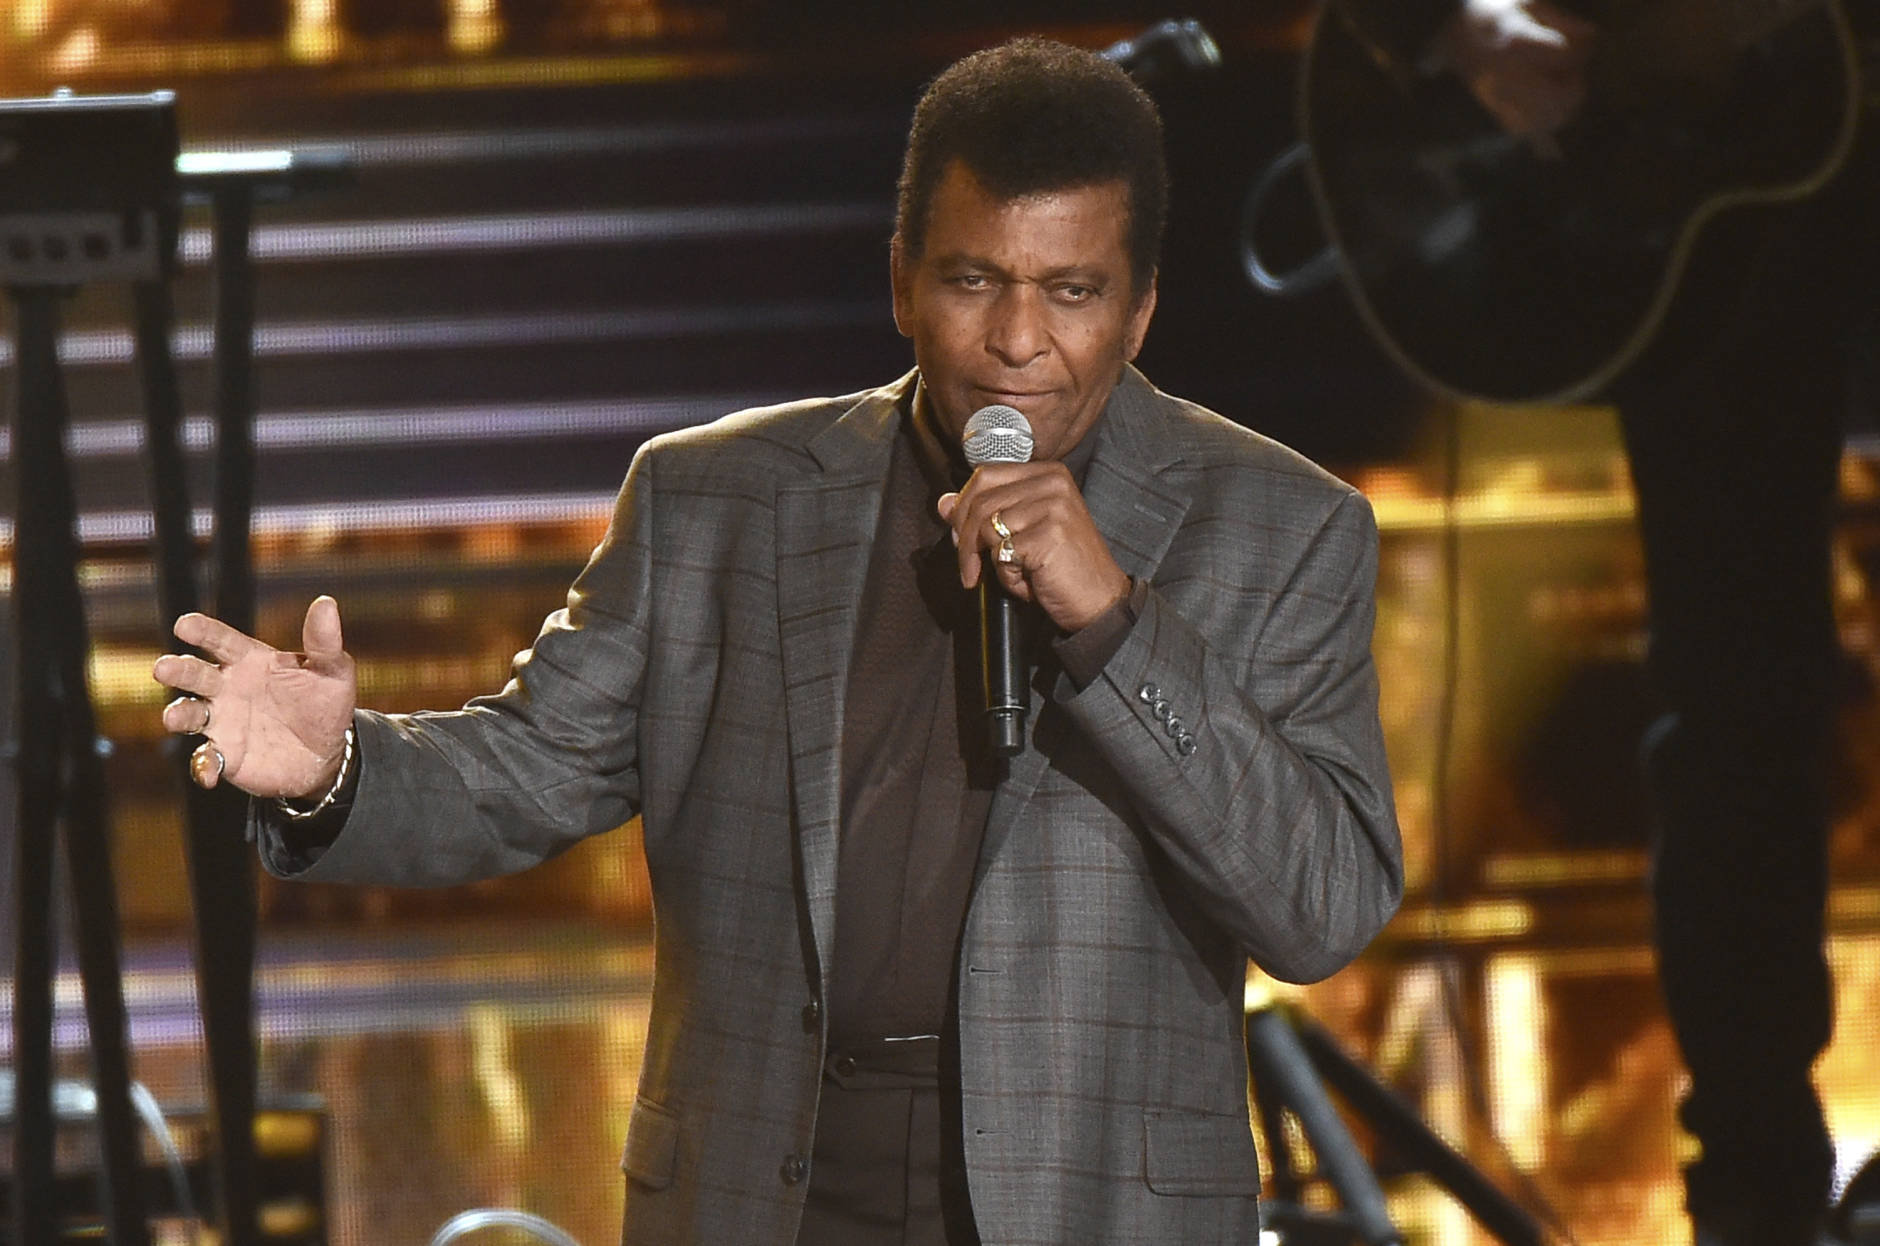 Charley Pride performs "Kiss An Angel Good Morning" at the 50th annual CMA Awards at the Bridgestone Arena on Wednesday, Nov. 2, 2016, in Nashville, Tenn. (Photo by Charles Sykes/Invision/AP)